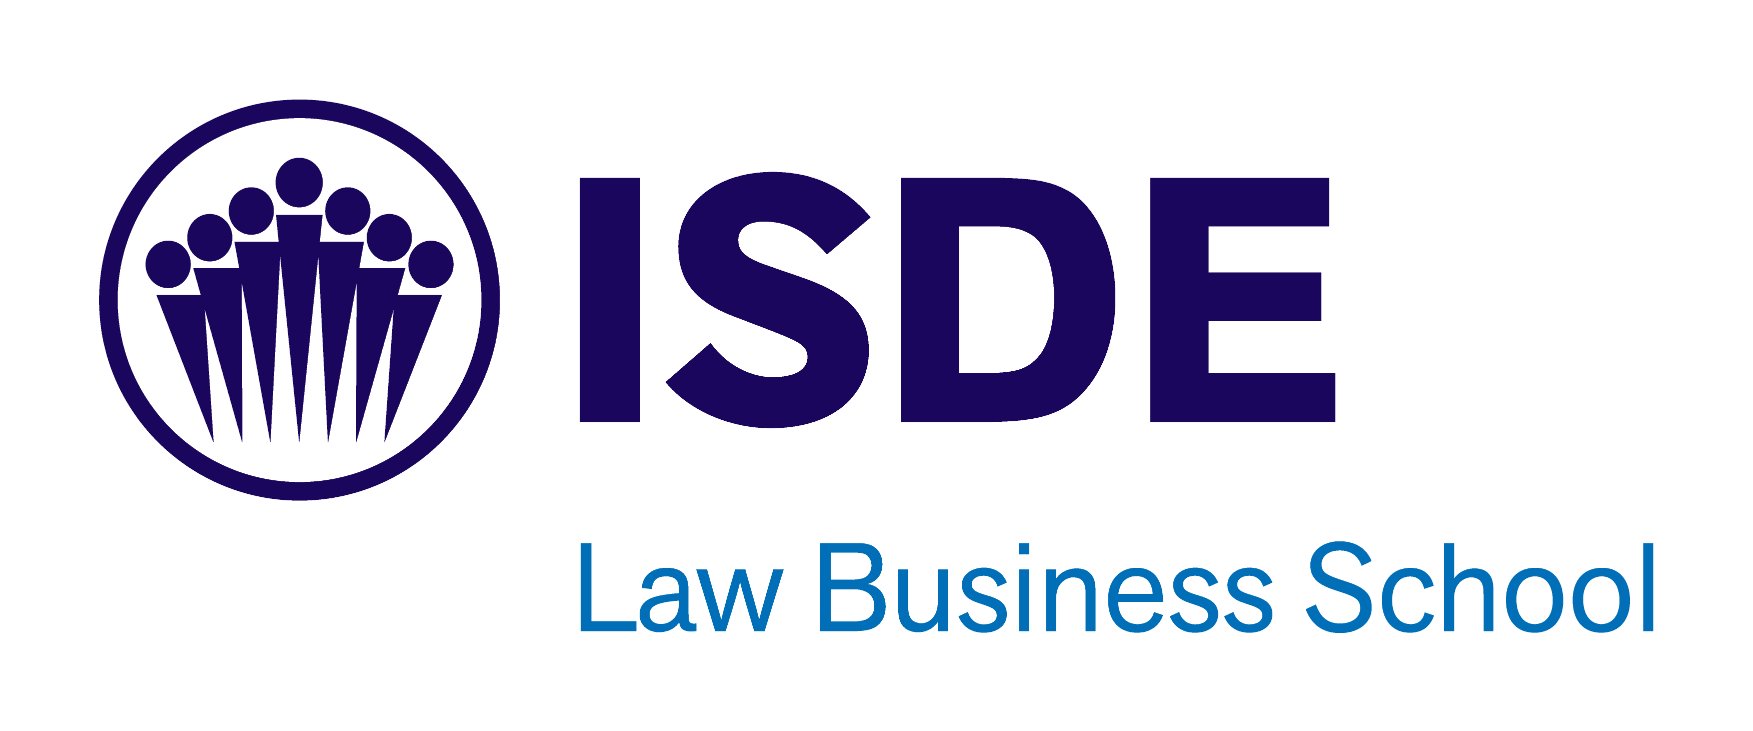 Curso Executive New Law & Legaltech - ISDE Law Business School